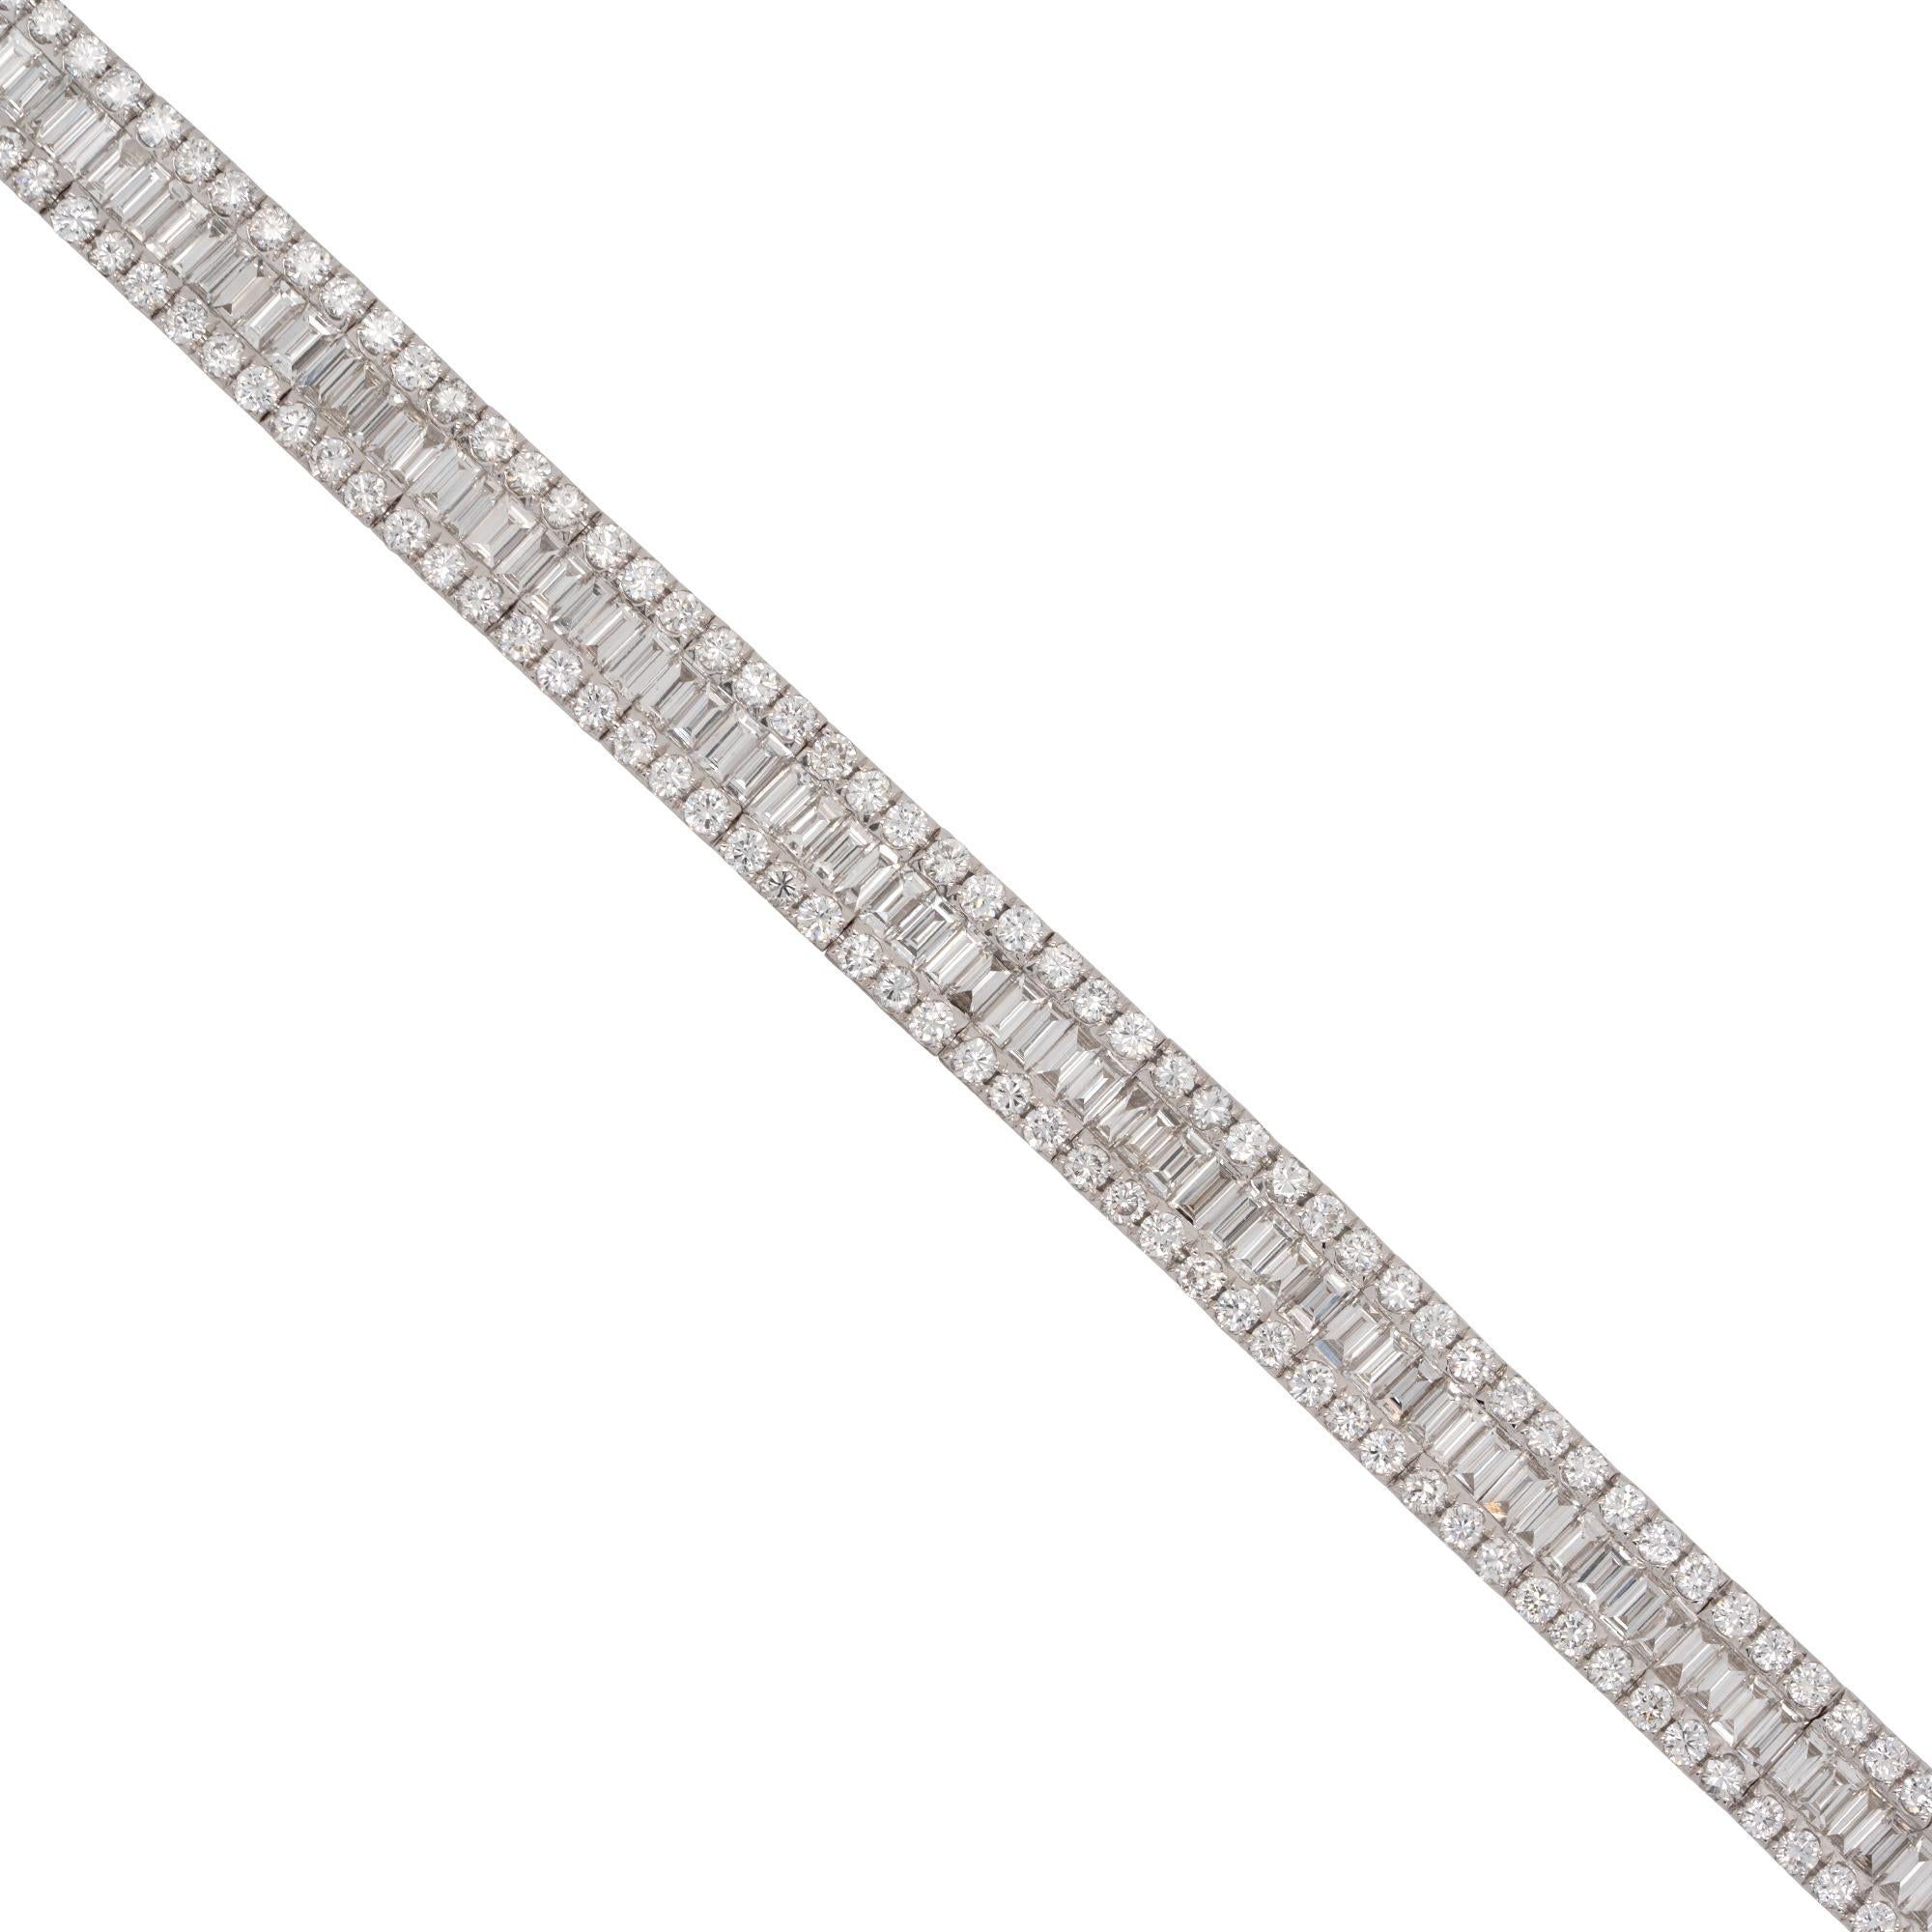 Material: 18k white gold
Diamond Details: Approx. 7.14ctw of round & baguette cut Diamonds . Diamonds are G/H in color and VS in clarity
Bracelet Measurements: 7 inches in length
Total Weight: 17.1g (11dwt)
Additional Details: This item comes with a